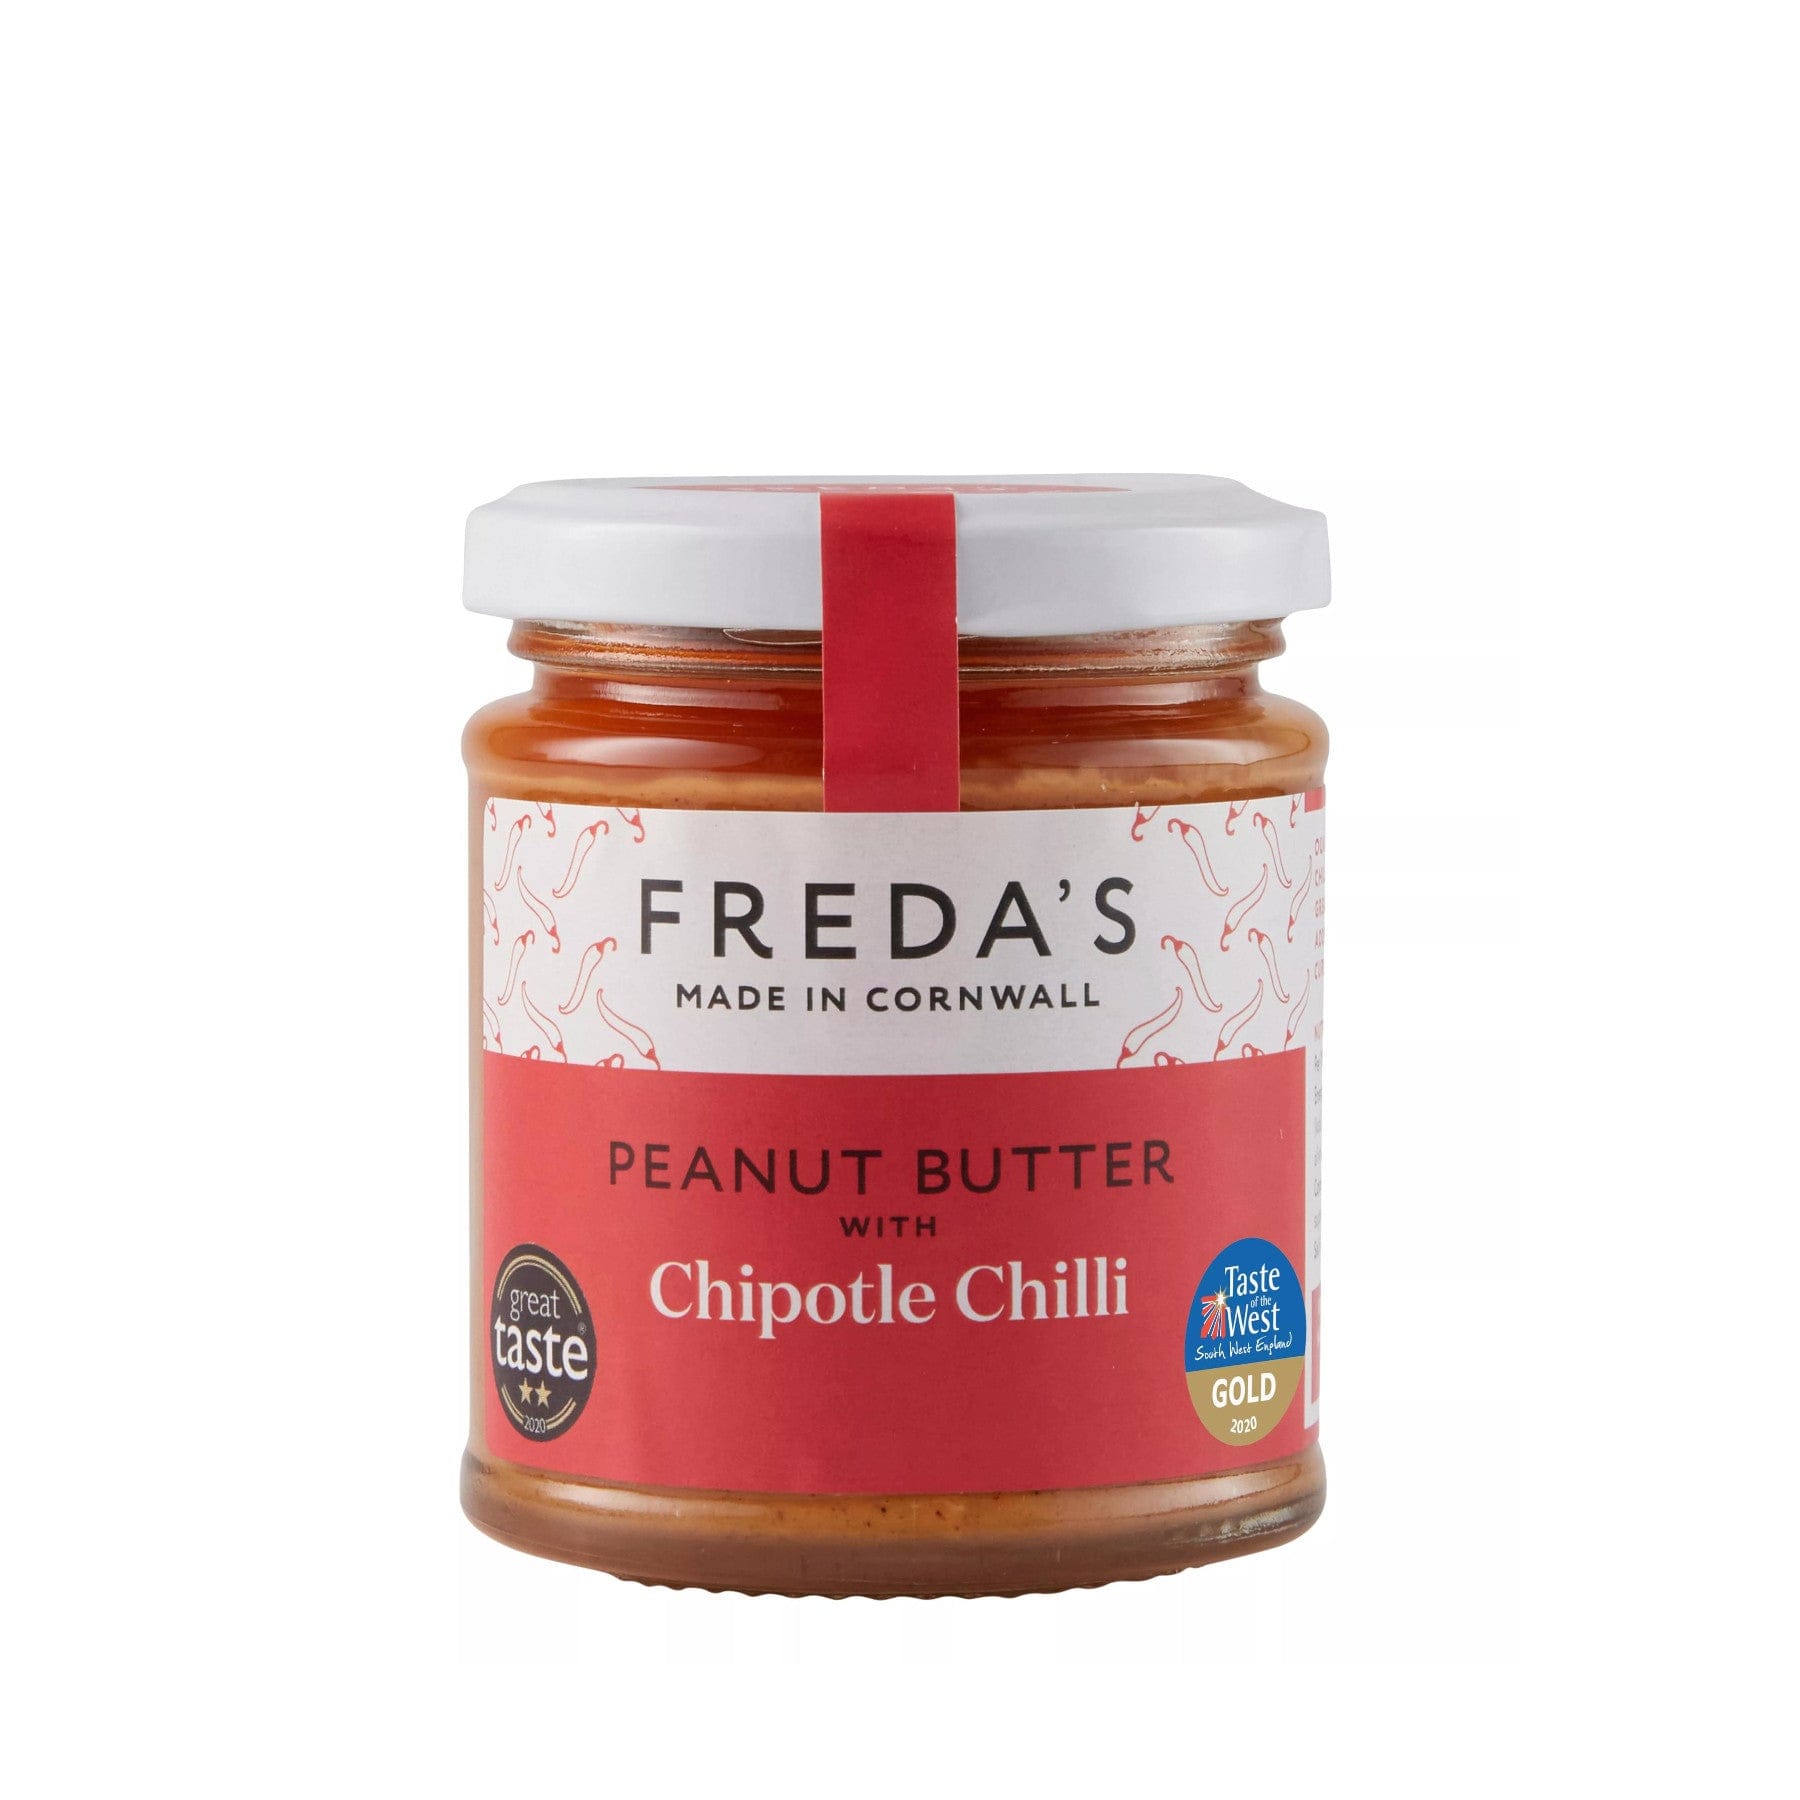 Freda's Cornwall Peanut Butter with Chipotle Chilli Jar, Award-winning Gourmet Spread, Isolated on White Background